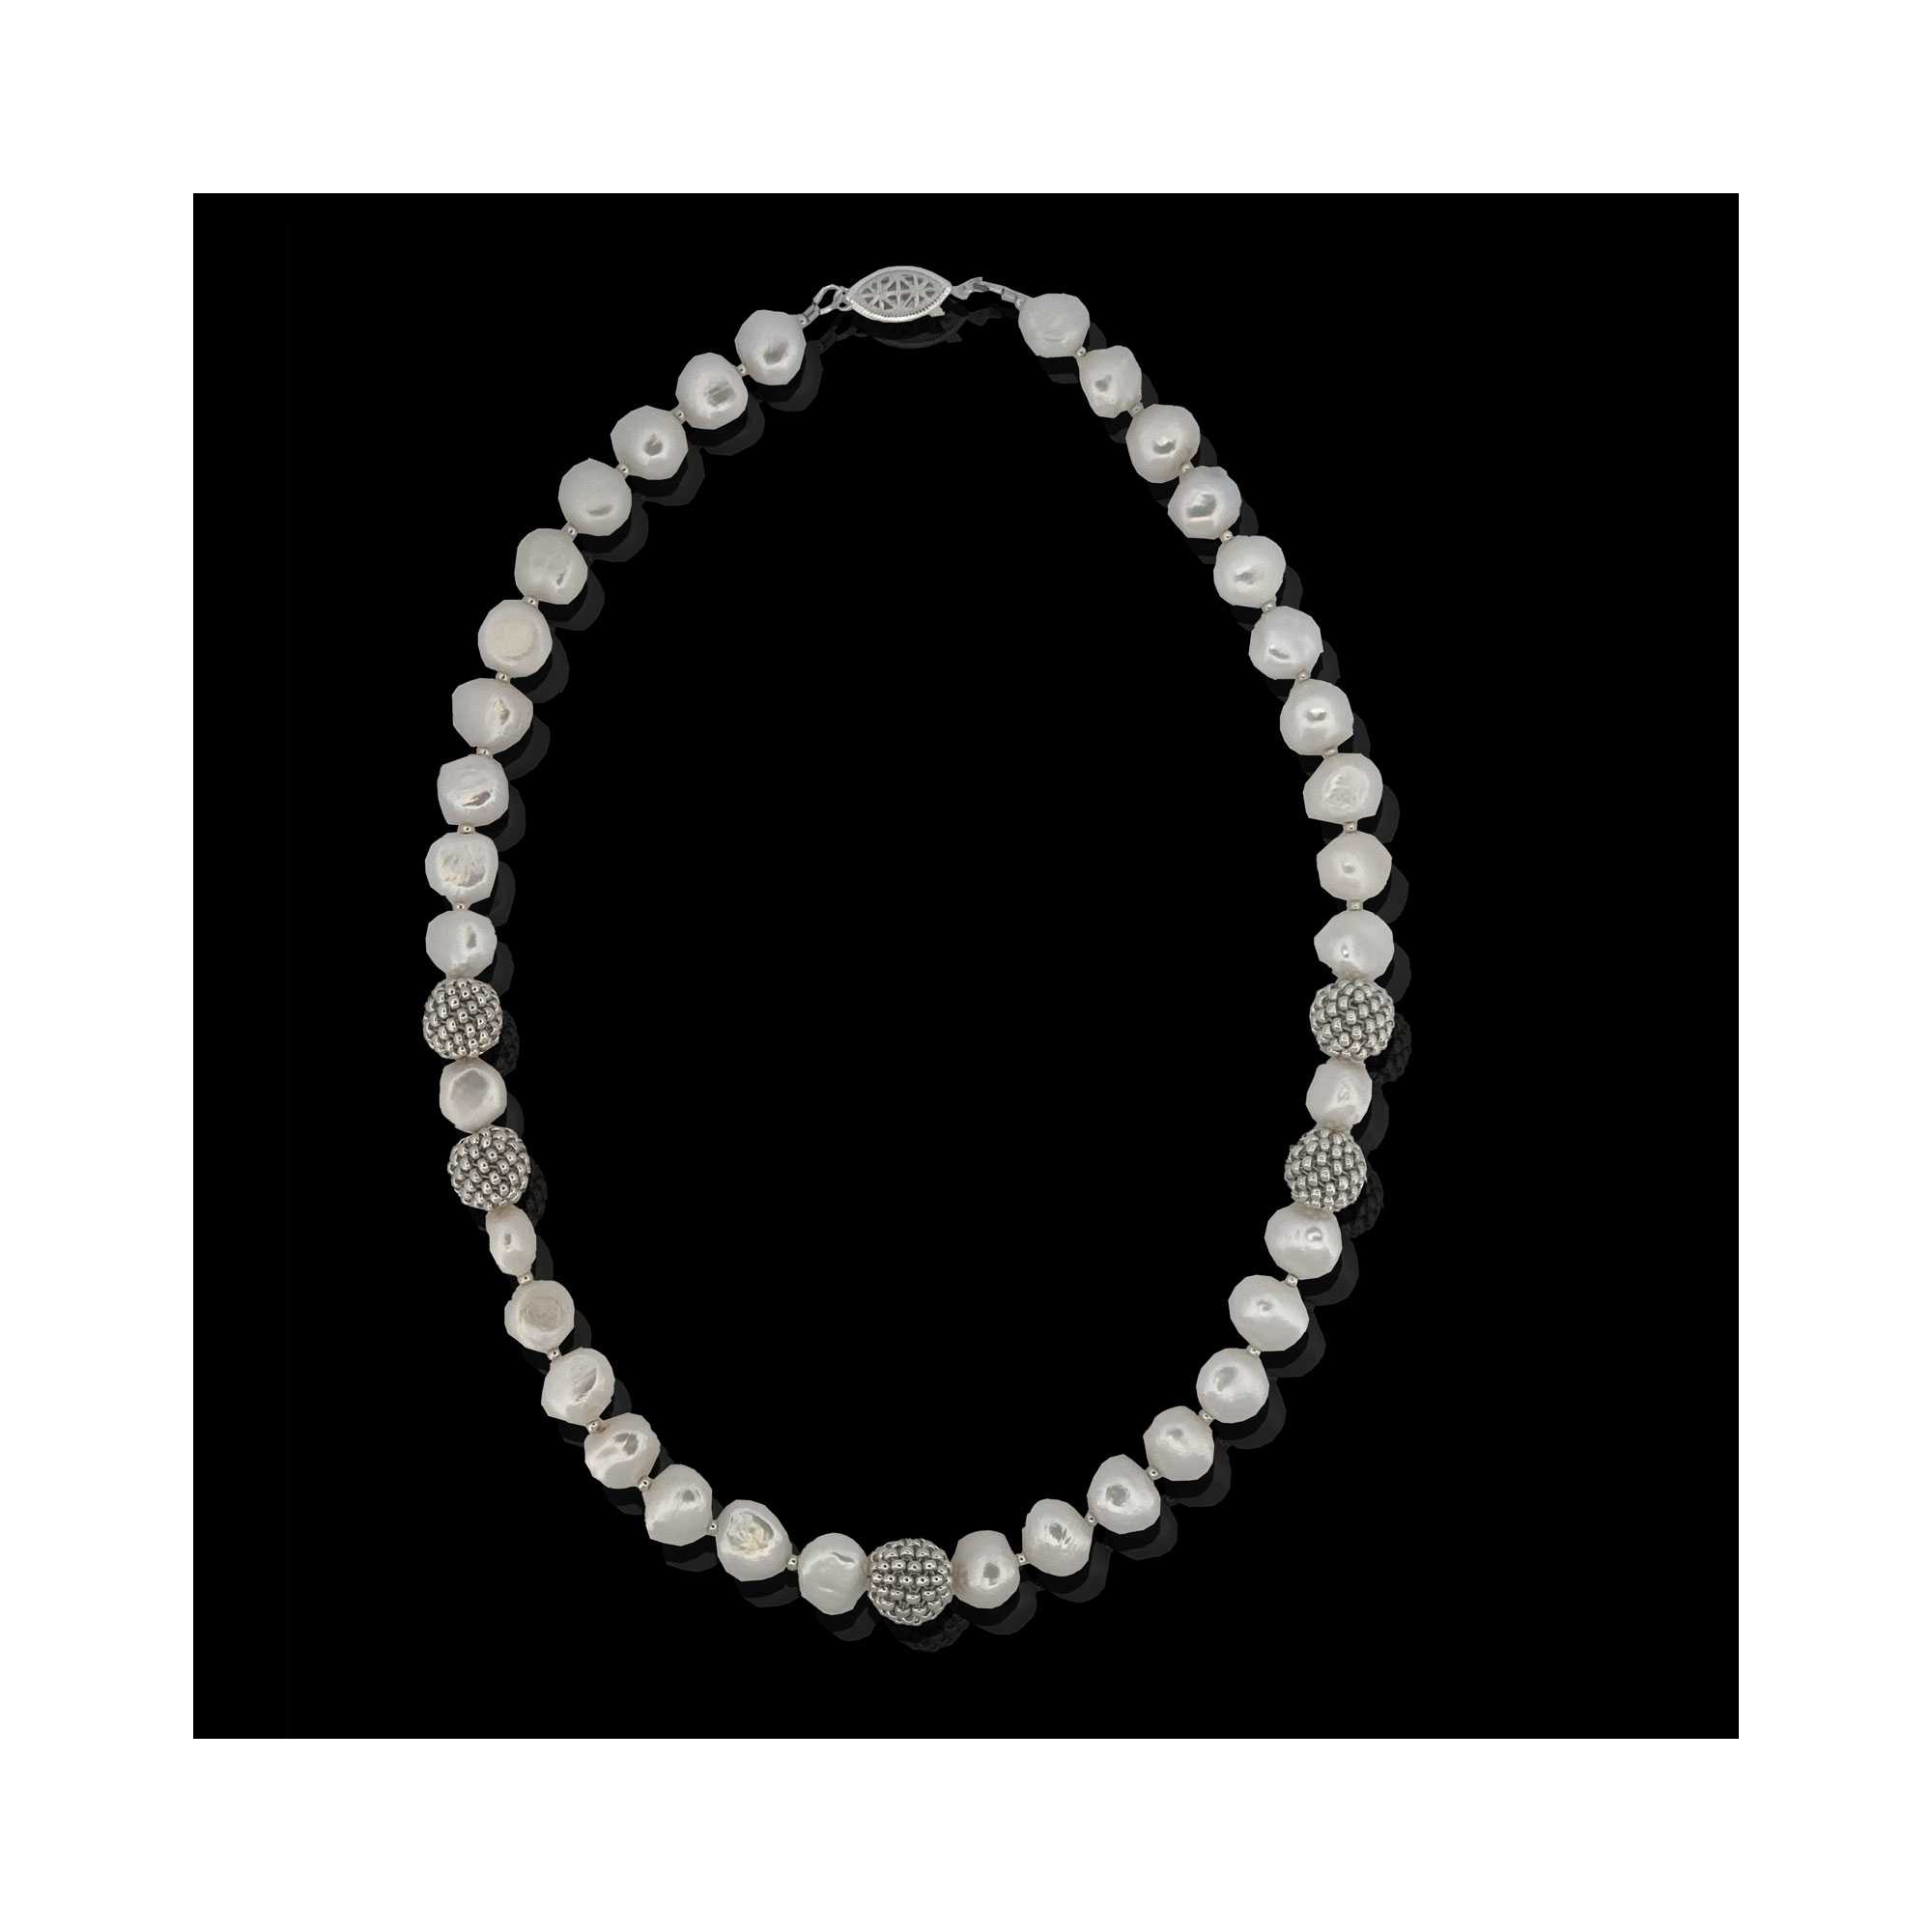 fresh water white Pearl Necklace - | Mali's Fashion Jewelry Women necklace made with White fresh water cultured pearl and Silver